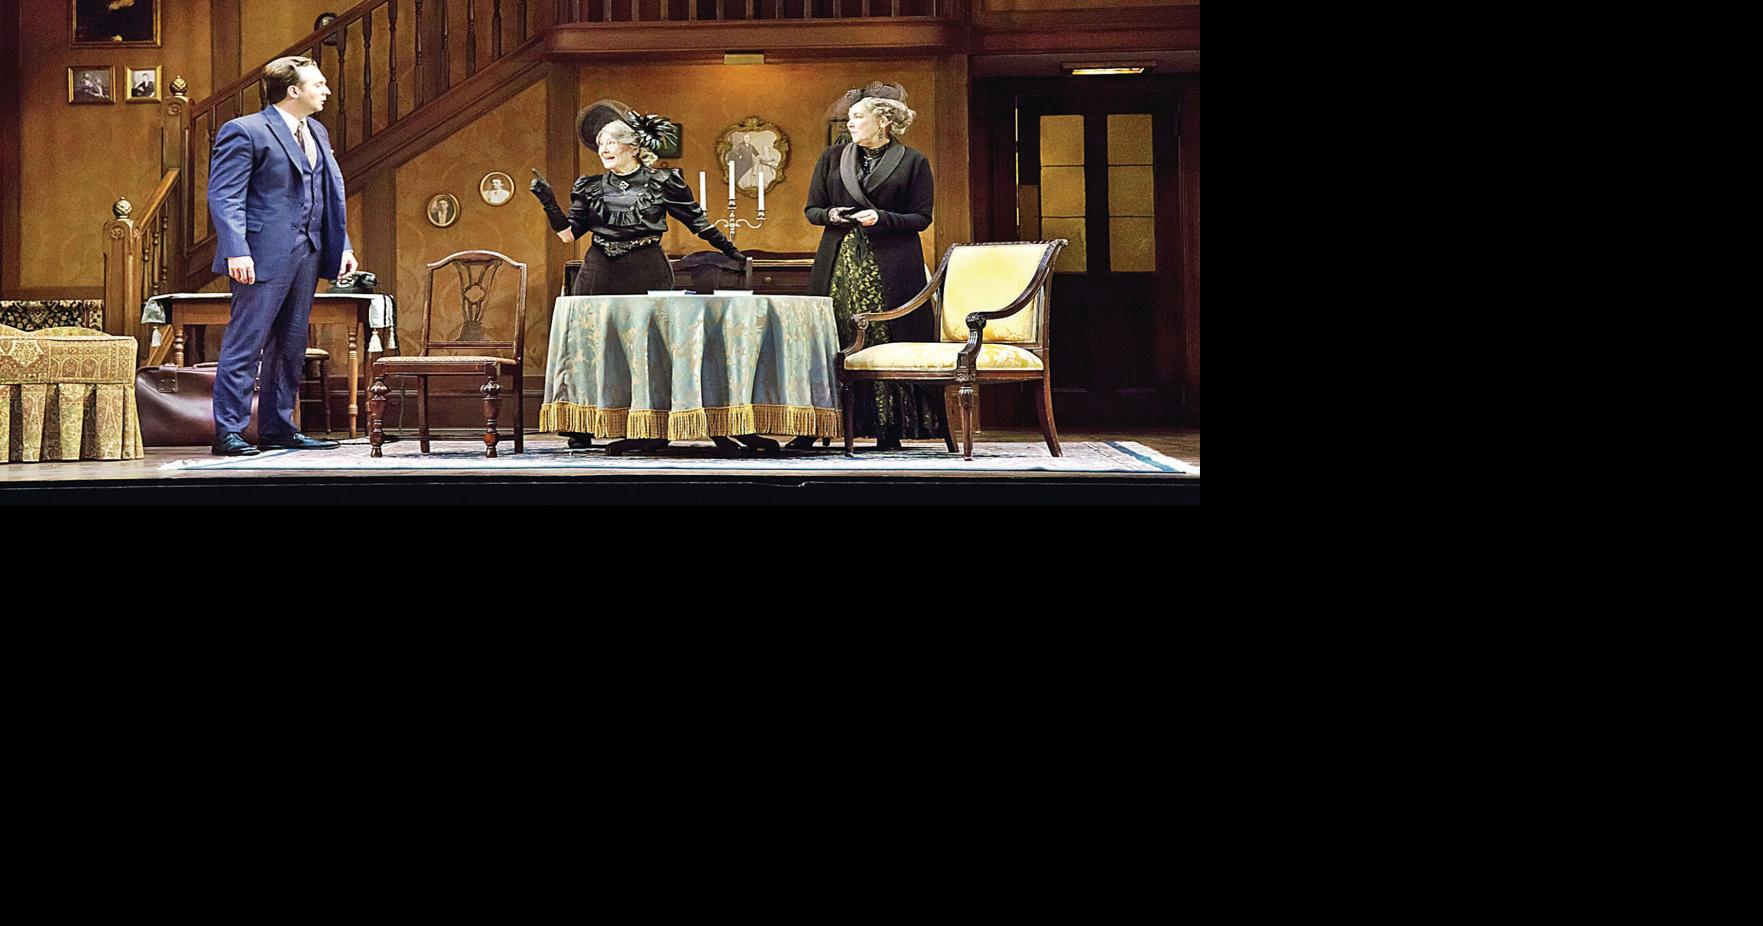 Arsenic and Old Lace (Broadway, Helen Hayes Theatre, 1941)